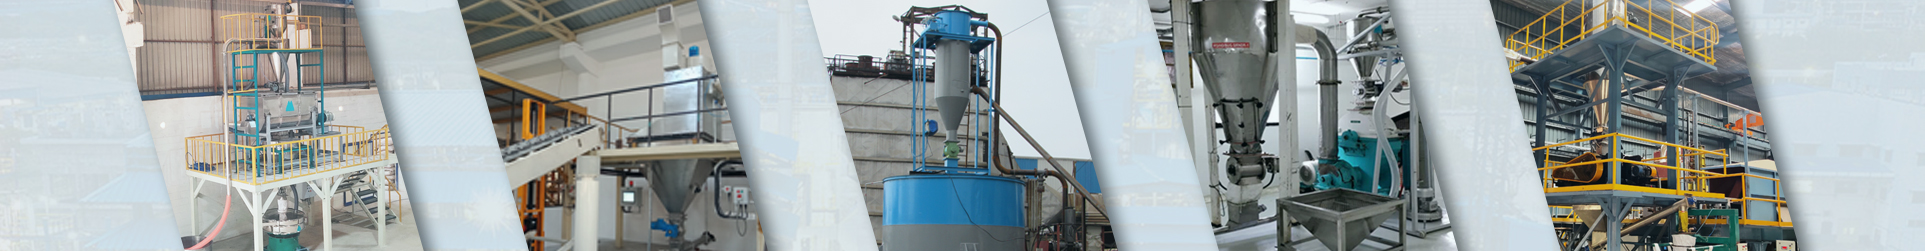 Modular Dust collector - Downdraft Dust Collector